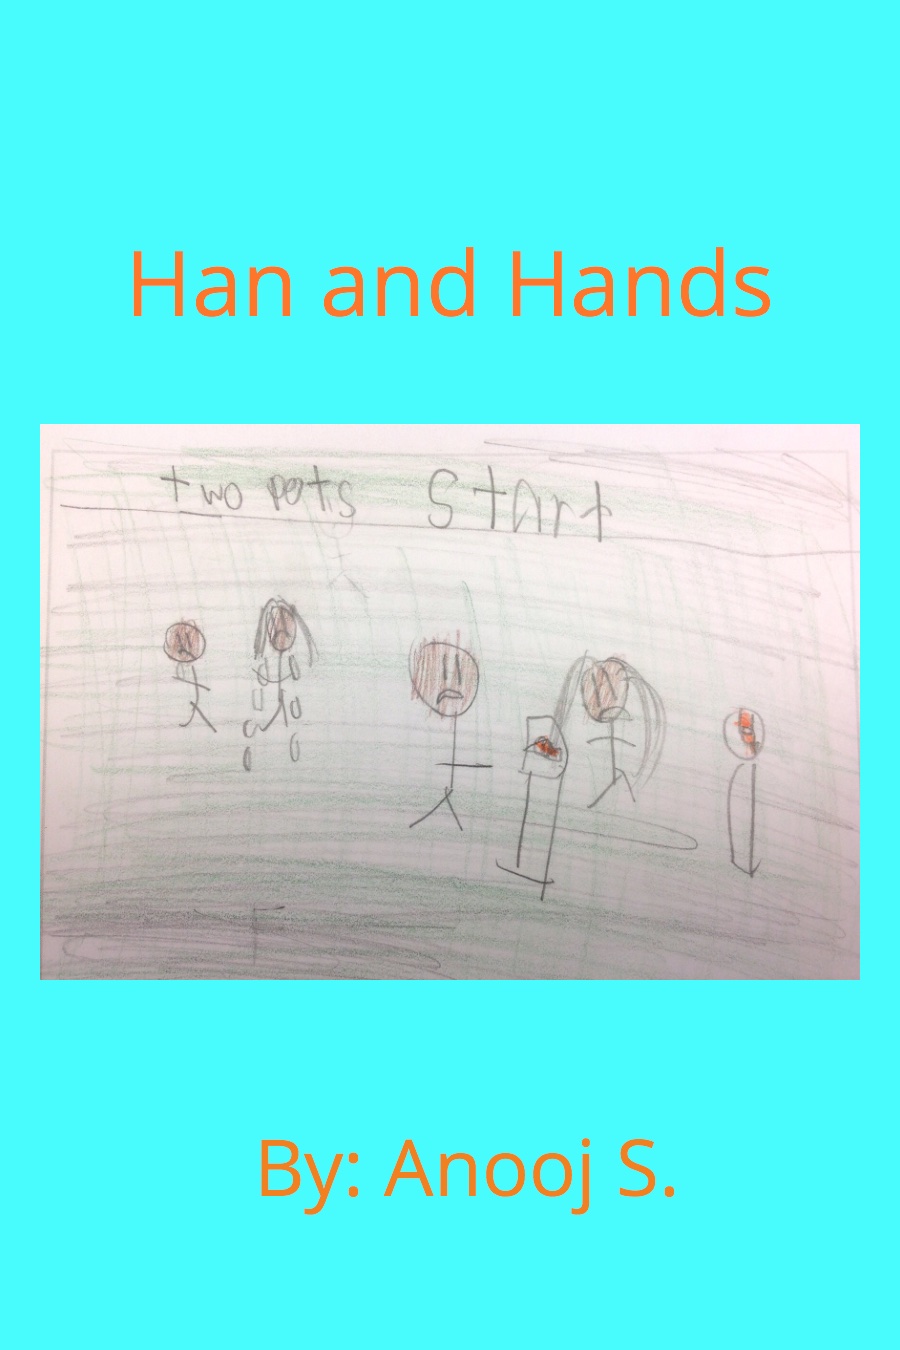 Han and Hands by Anooj S